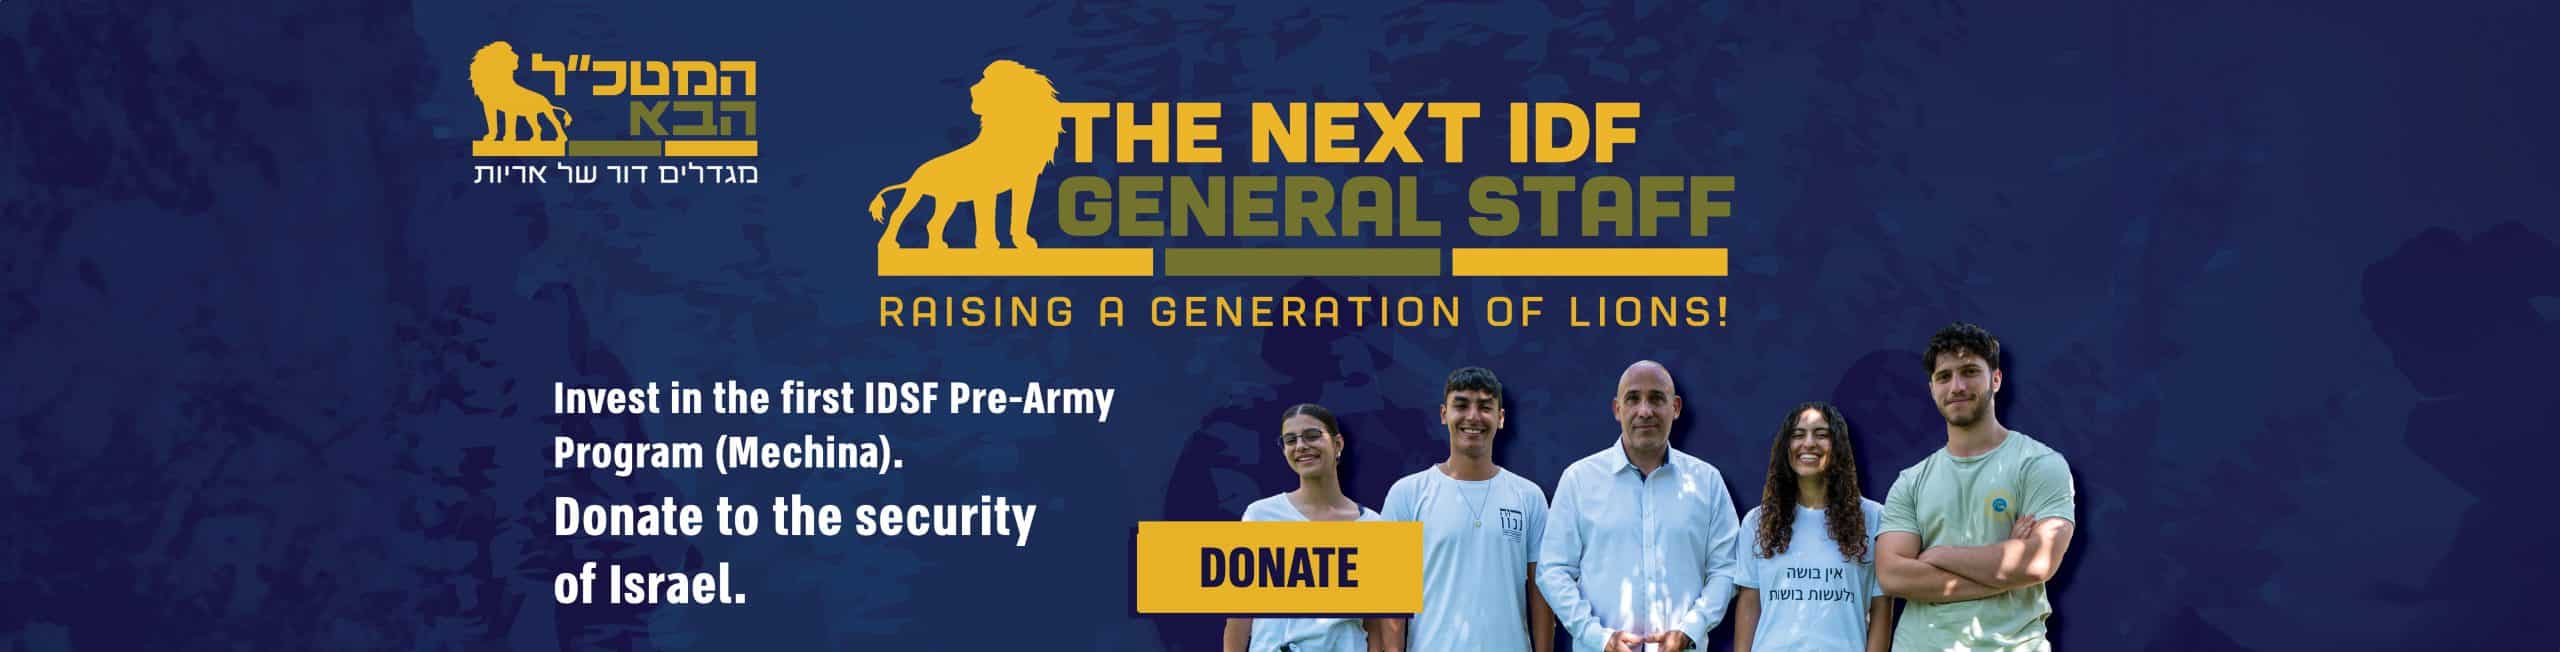 Donate to the security of Israel